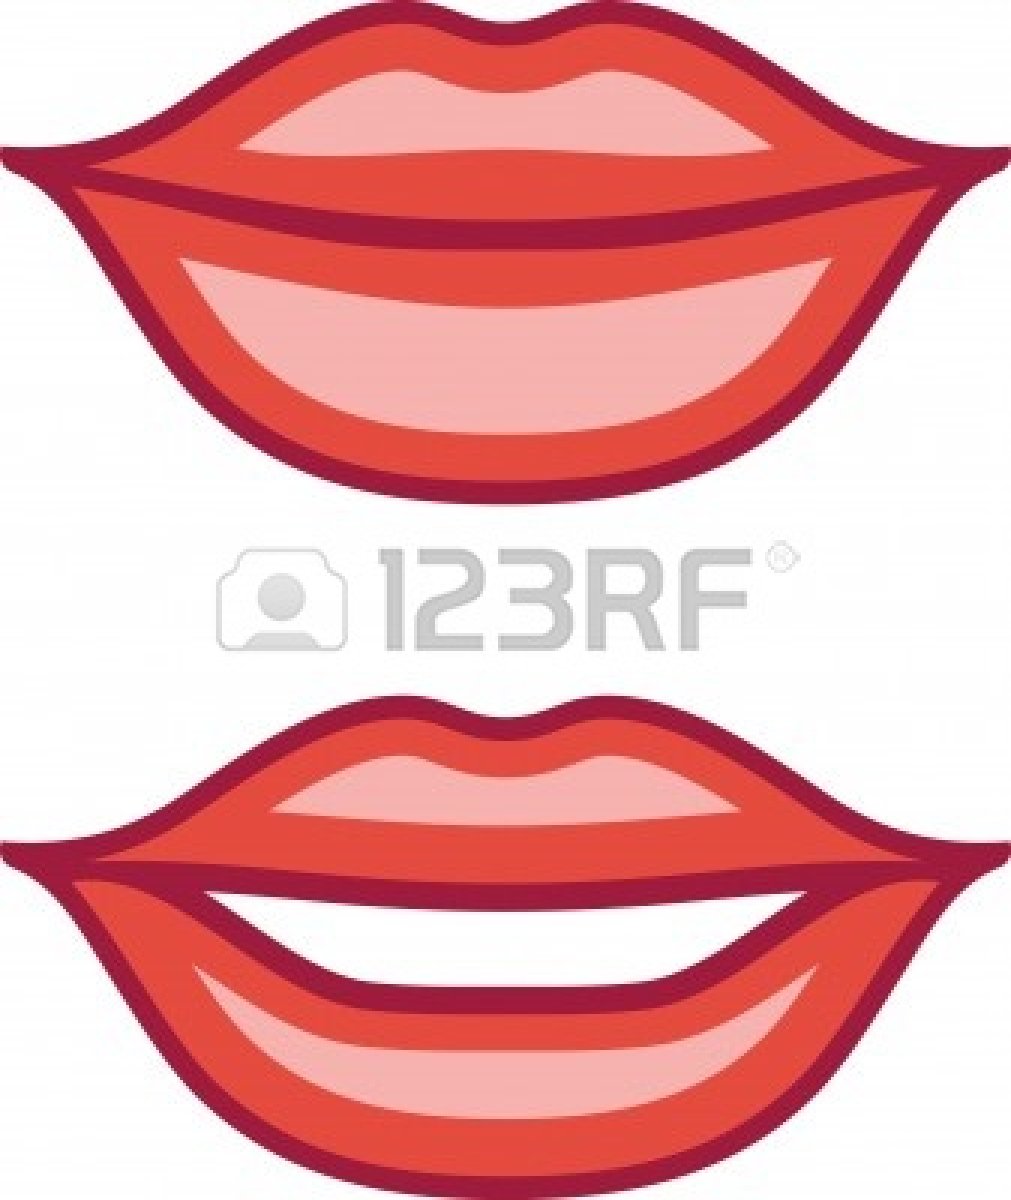 Closed Mouth Clip Art Mouth Smile Clip Art 4971672 Smile Jpg